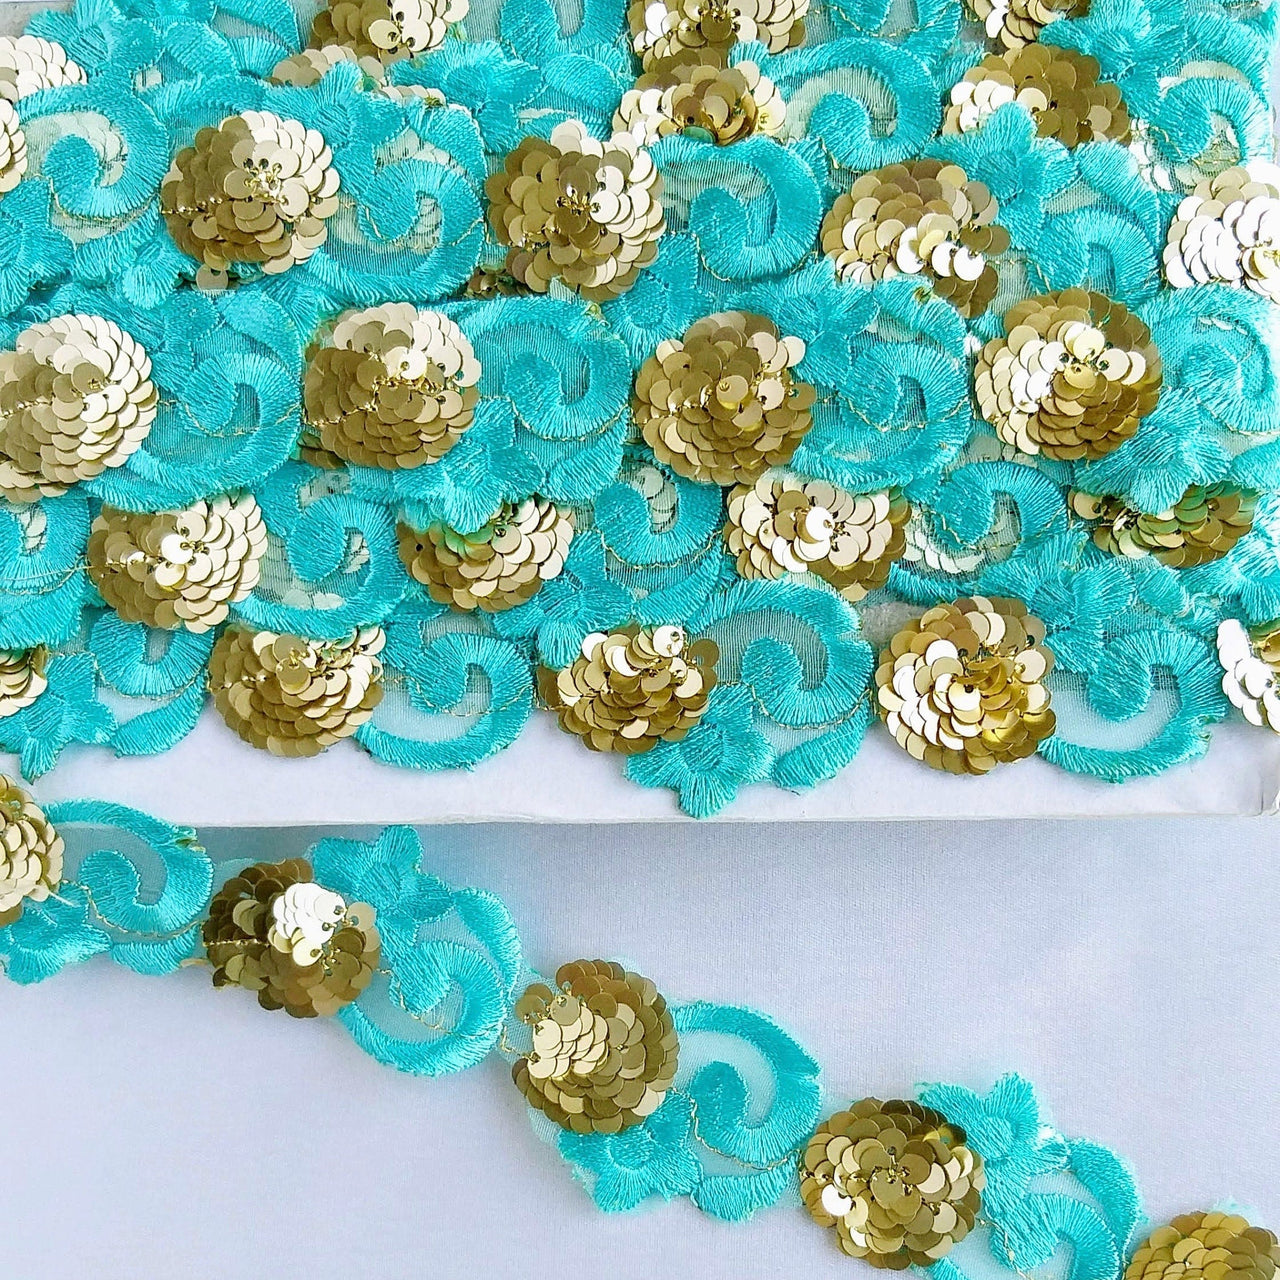 Blue Lace Trim, Tissue Fabric Cutwork With Floral Embroidery & Gold Sequins, Indian Embroidery 